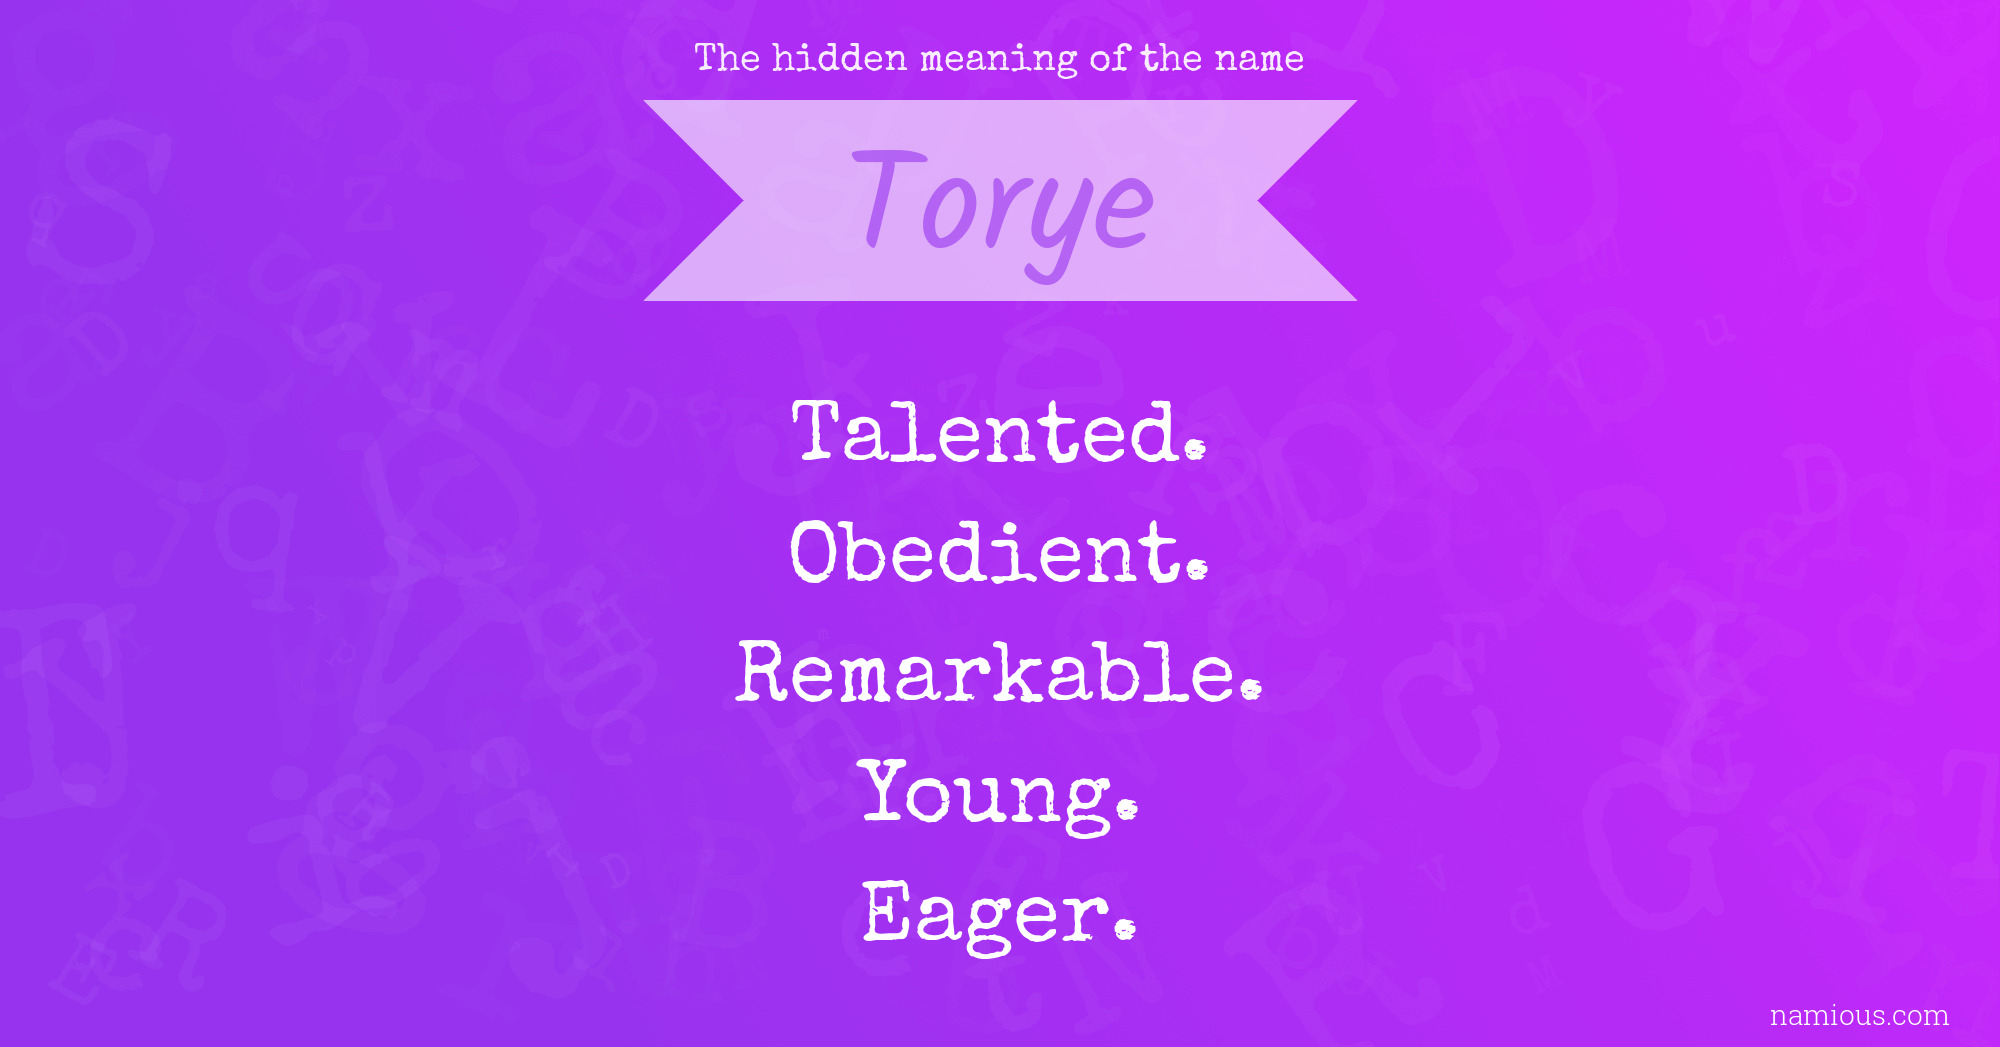 The hidden meaning of the name Torye